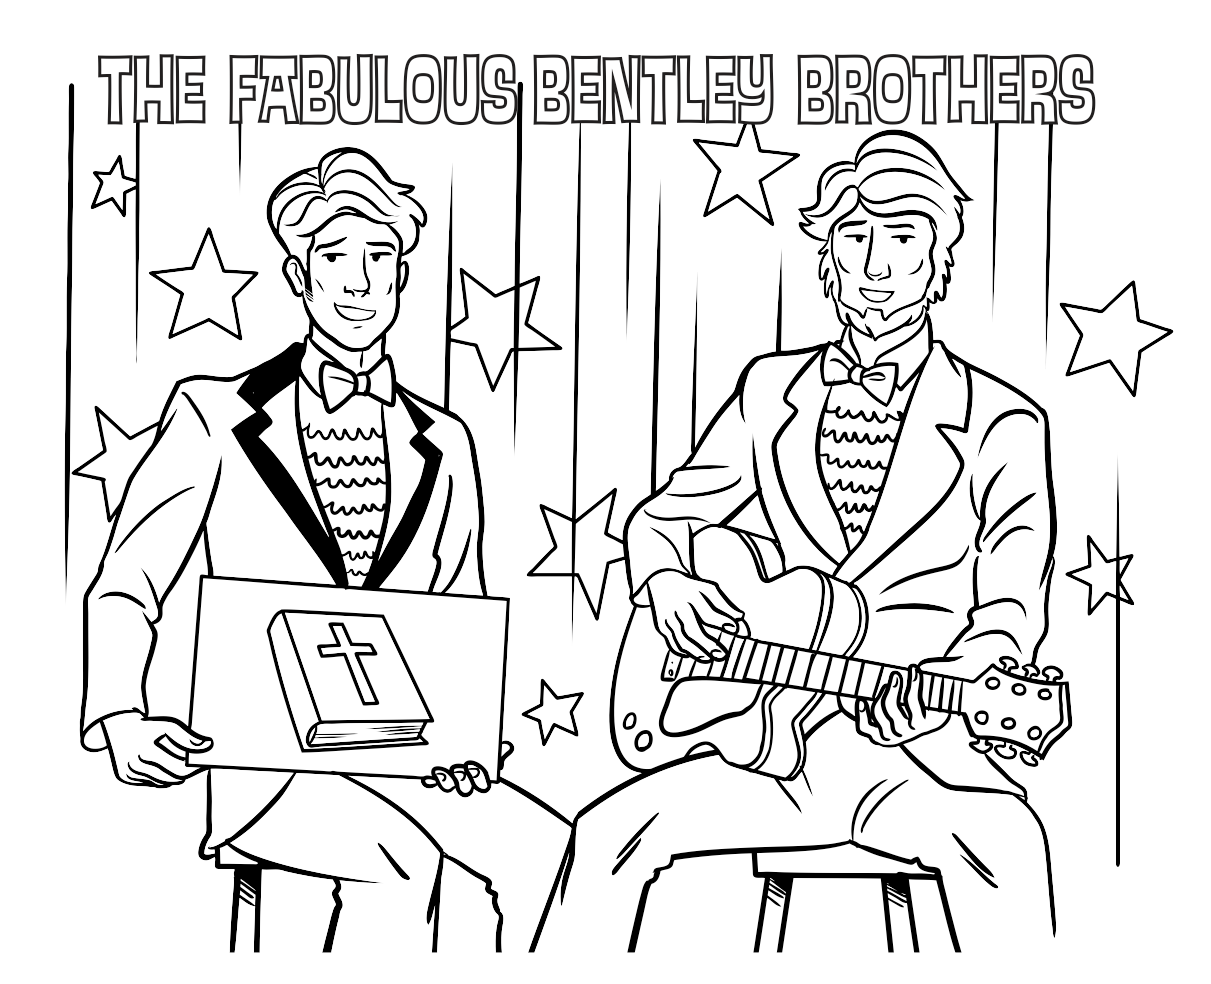 The Fabulous Bentley Brothers Coloring Page - Whats in the Bible